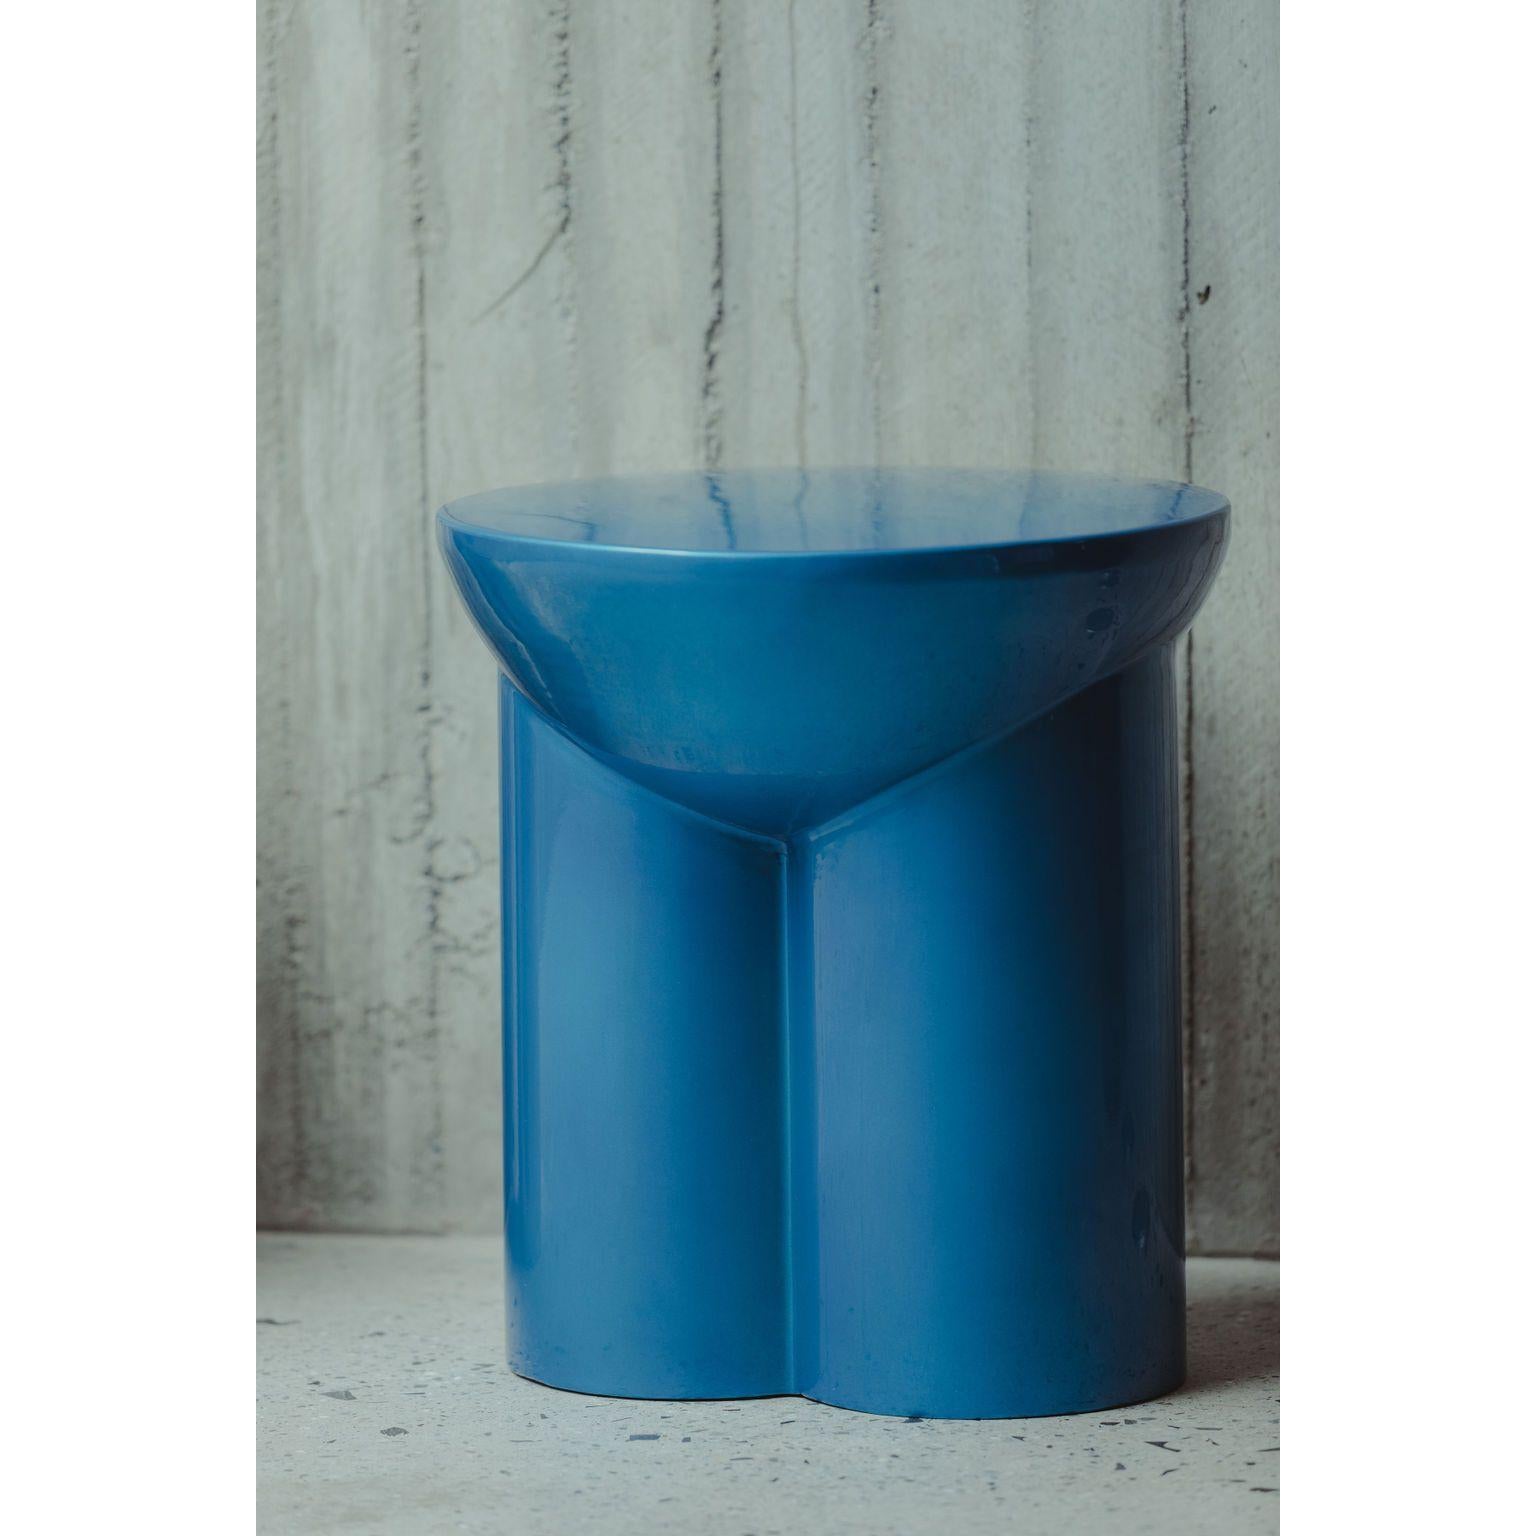 Metate Translucent Blue Steel Stool by David Del Valle
Dimensions: D 40 x W 40 x H 40 cm.
Materials: Steel.

DAVID VALLE
We are a place, a space, a woven chair, the dreams of a craftsman, the pride of a worker, we are a way of thinking, we are